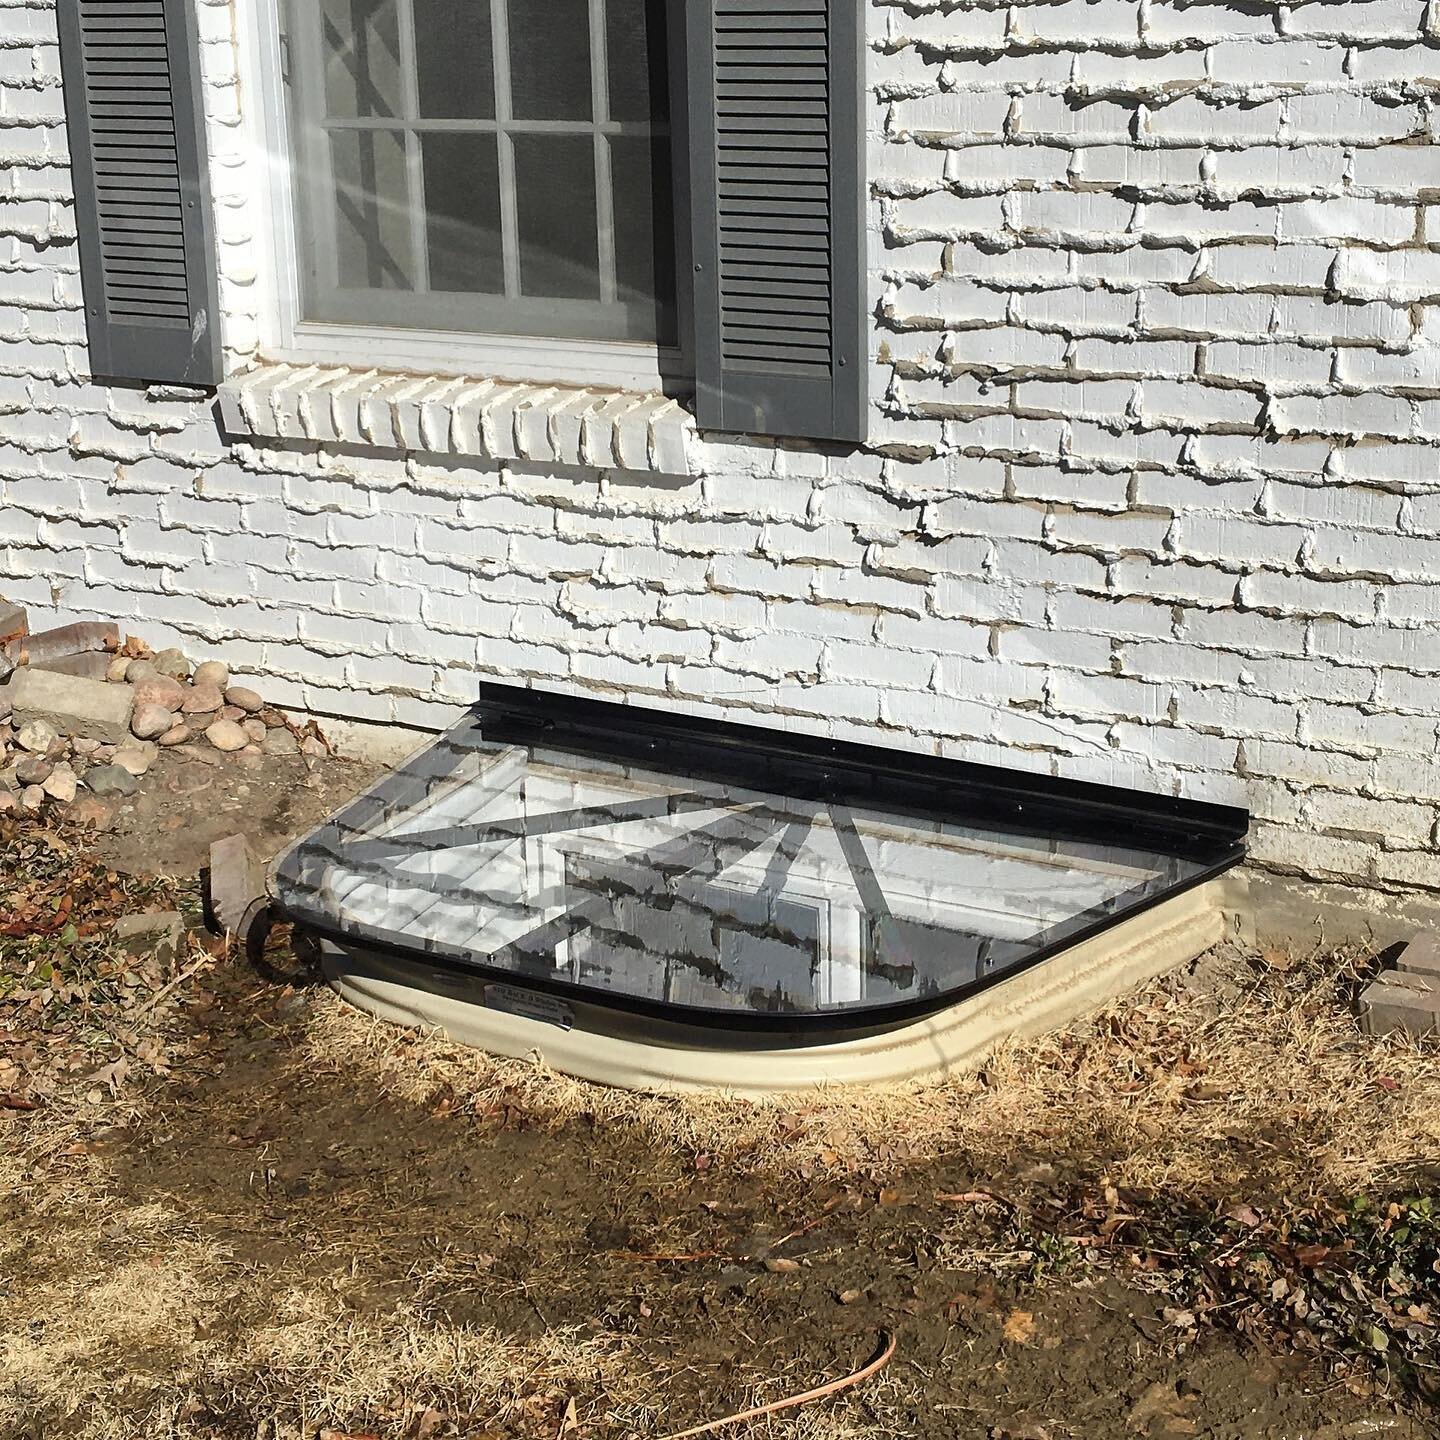 Window wells present homeowners with 3 main issues.
1. Safety - A big hole in the ground is extremely dangerous. A misstep can mean the life of a person or animal.
2. Security - The window in the well has the potential to be a critically vulnerable s